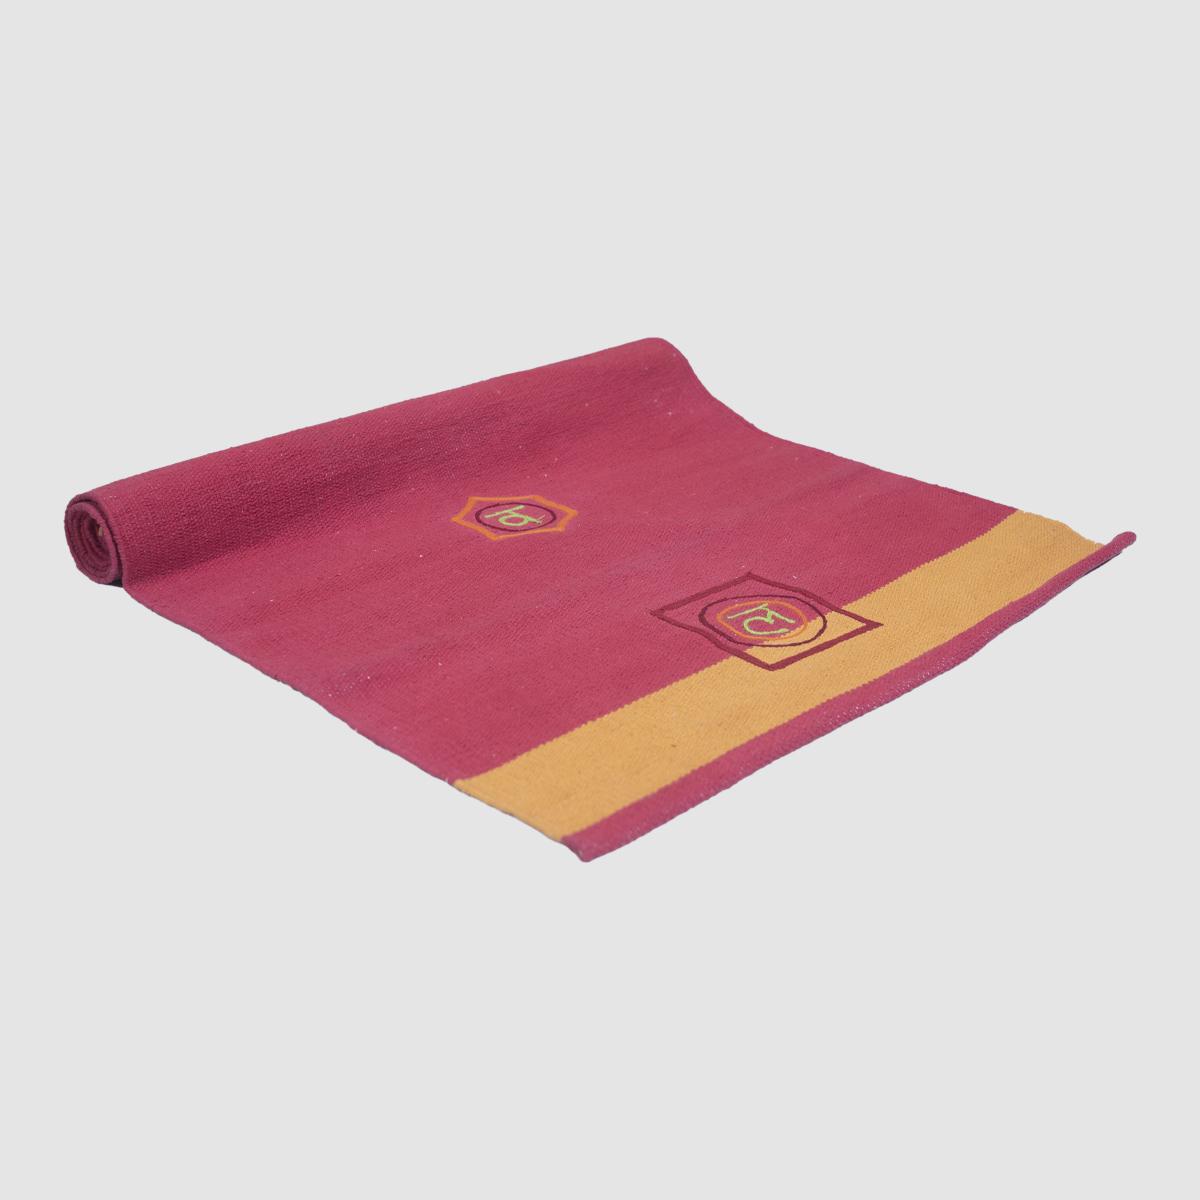 Natural and Breathable Yoga Mat for Mindful Practice - VNS Bazaar